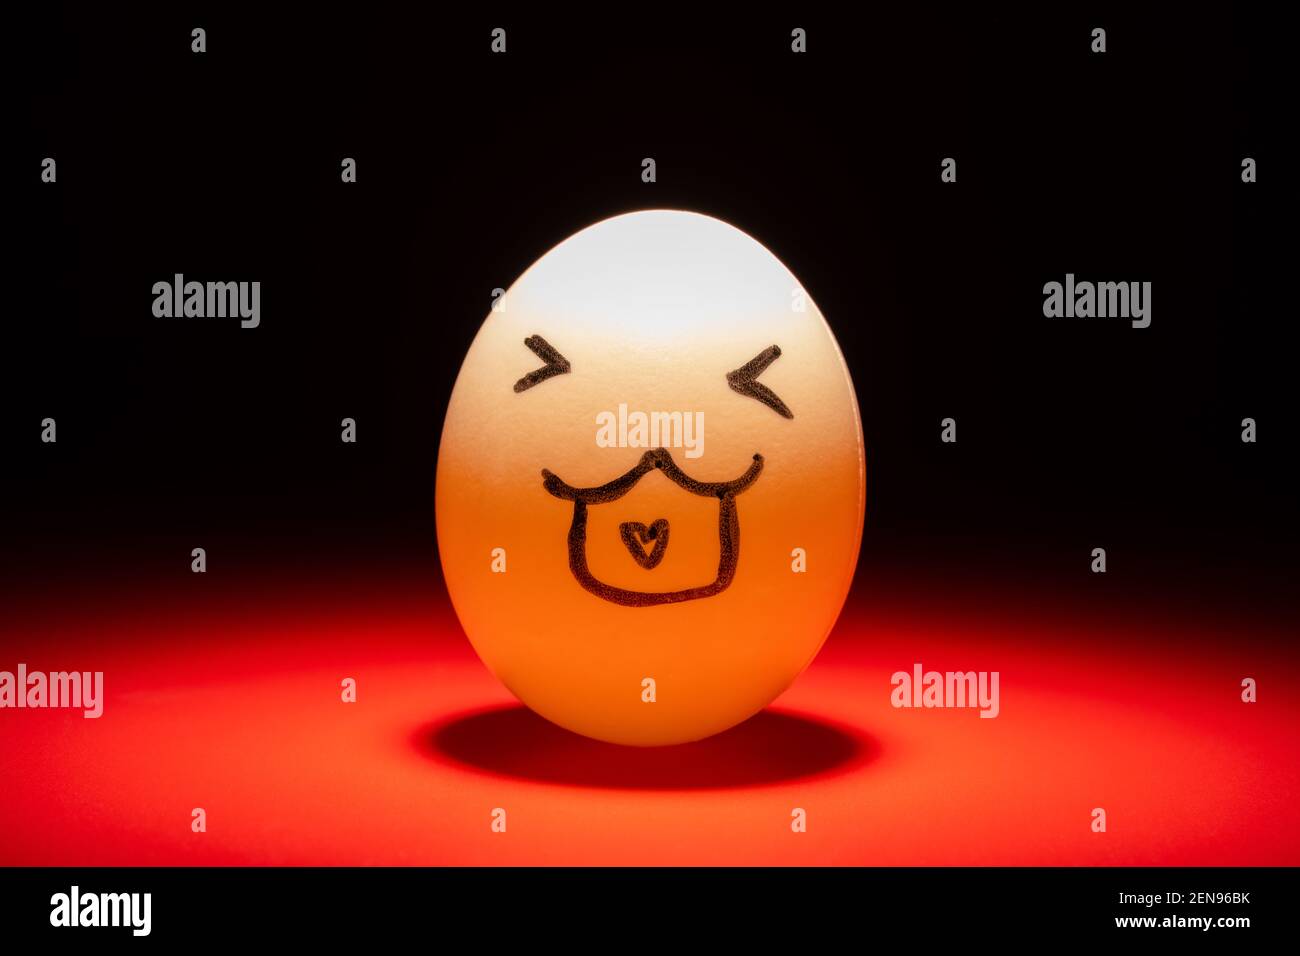 cute smiling egg face highlighted in dark Stock Photo